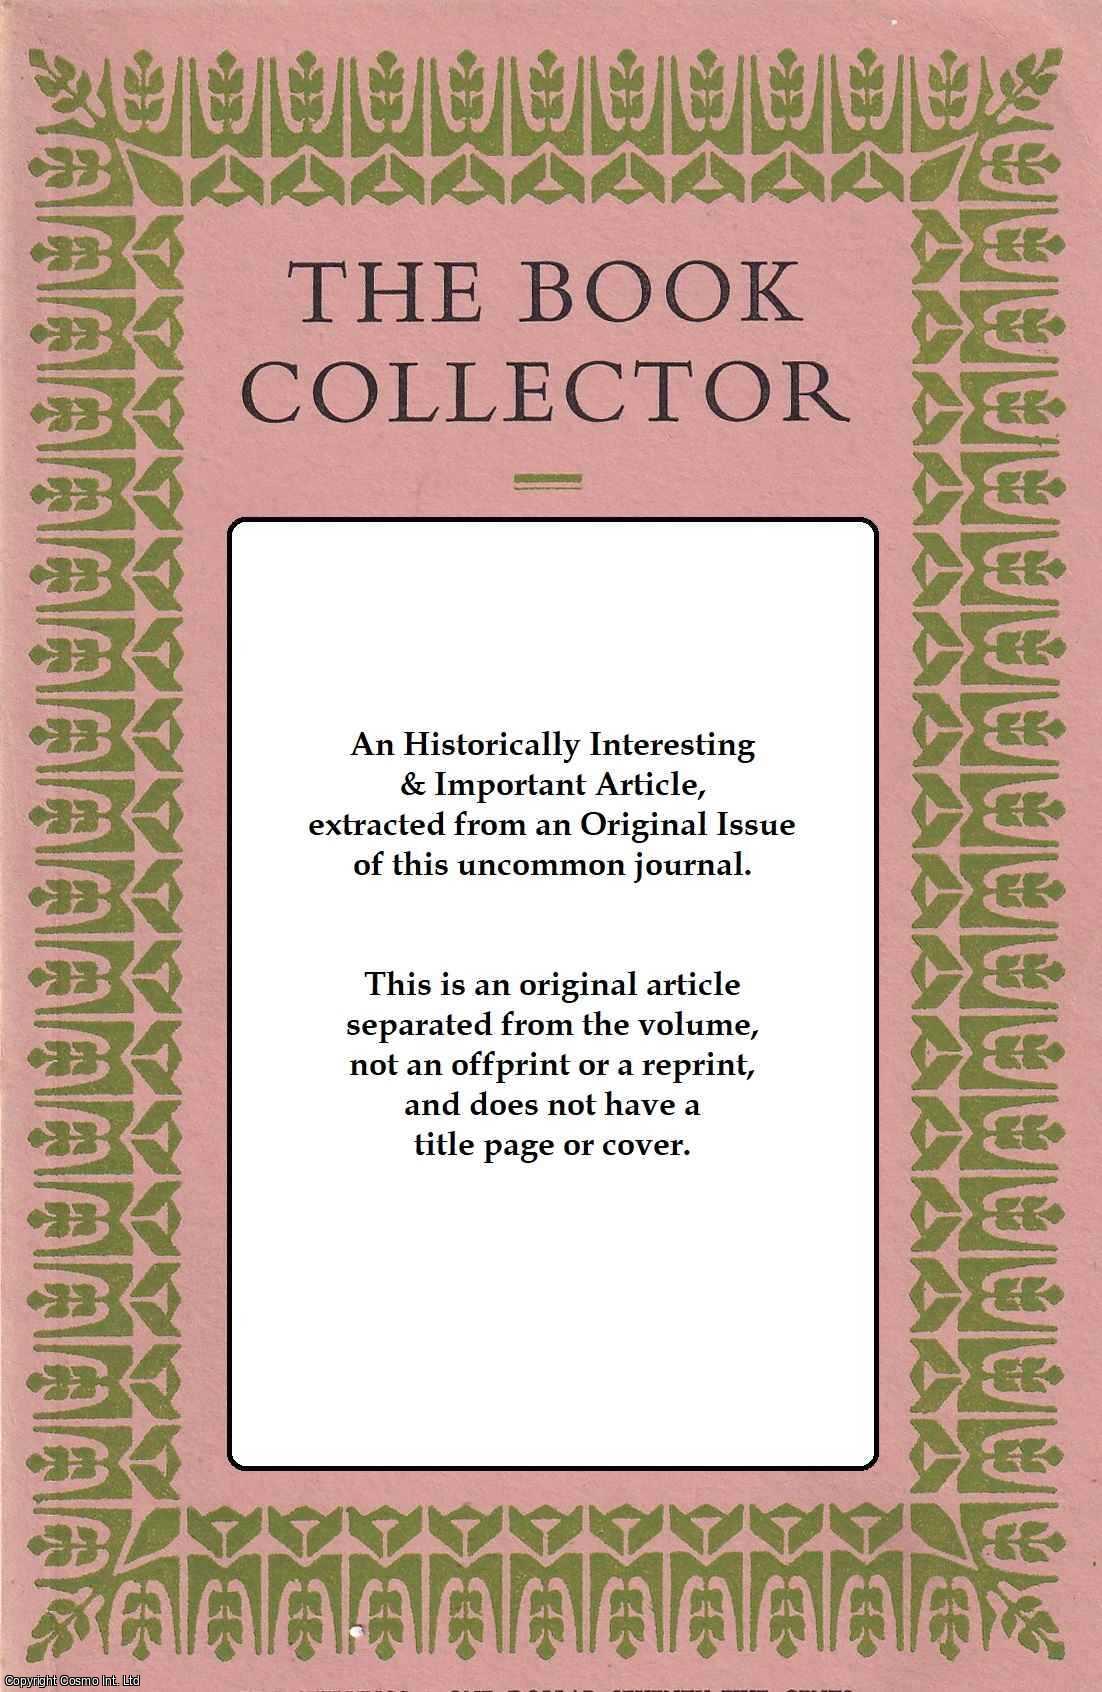 Richard A. Linenthal - Medieval and Renaissance Manuscripts. A Handlist of The Collection of B. S. Cron. This is an original article separated from an issue of The Book Collector journal, 2005.